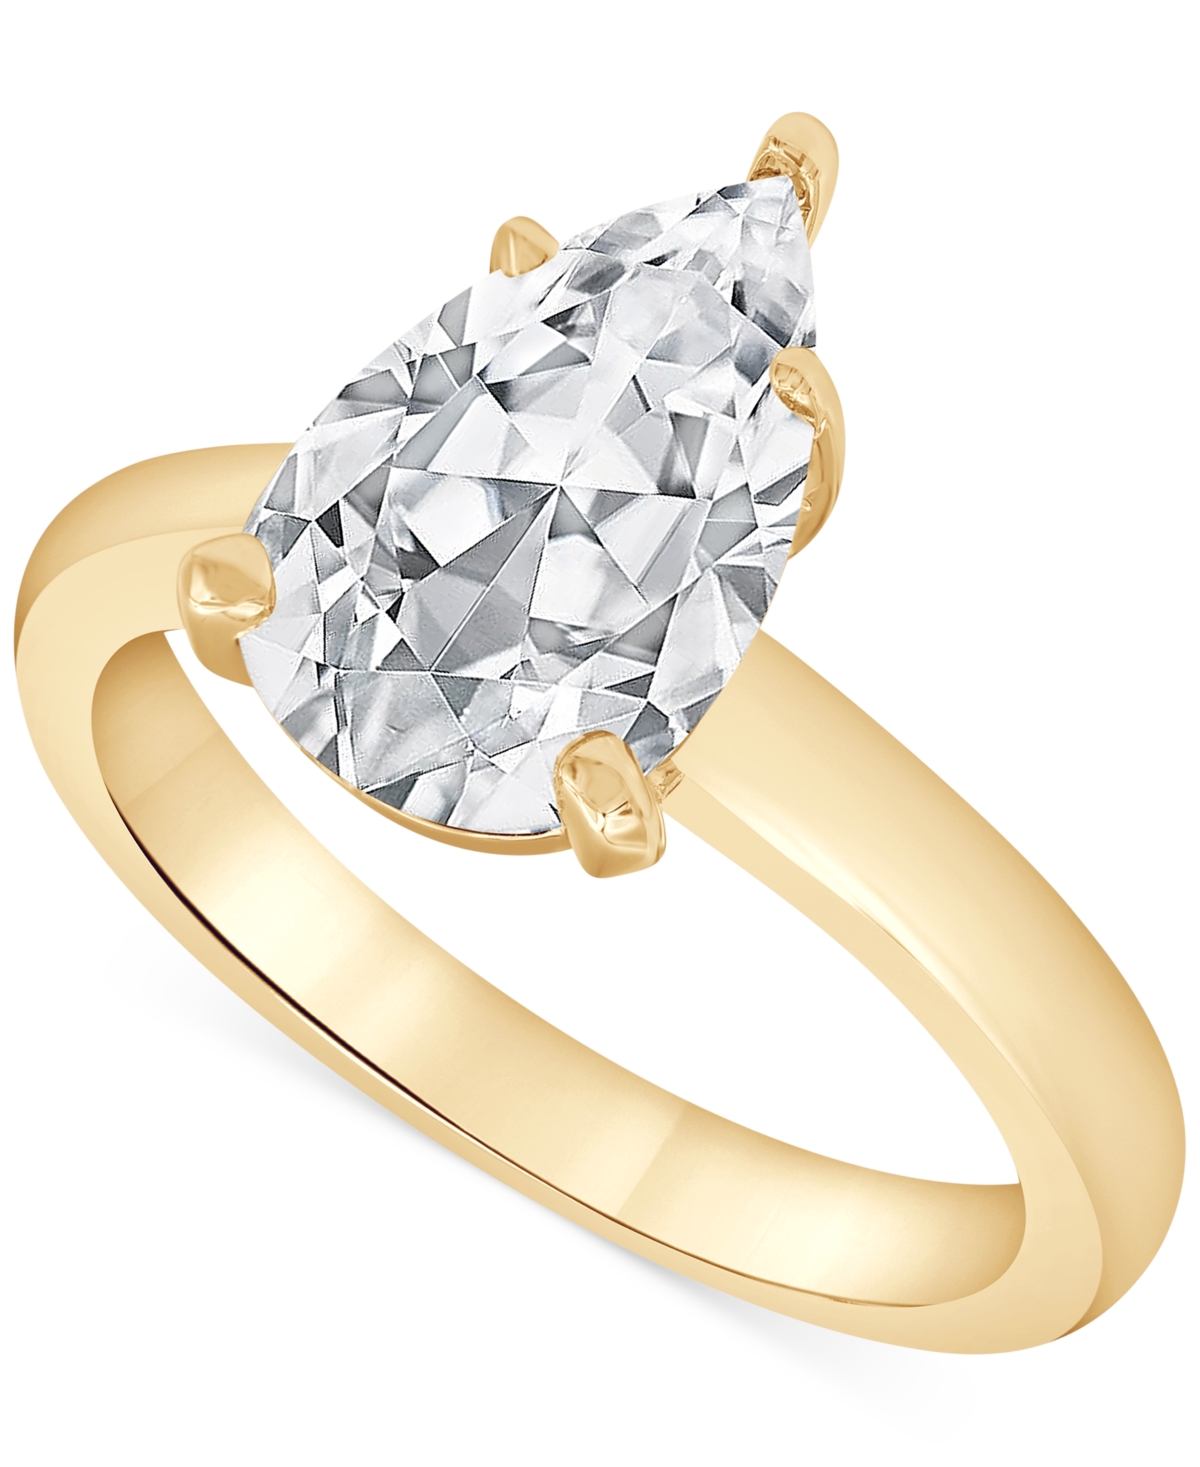 Certified Lab Grown Diamond Pear Solitaire Engagement Ring (4 ct. t.w.) in 14k Gold - Yellow Gold